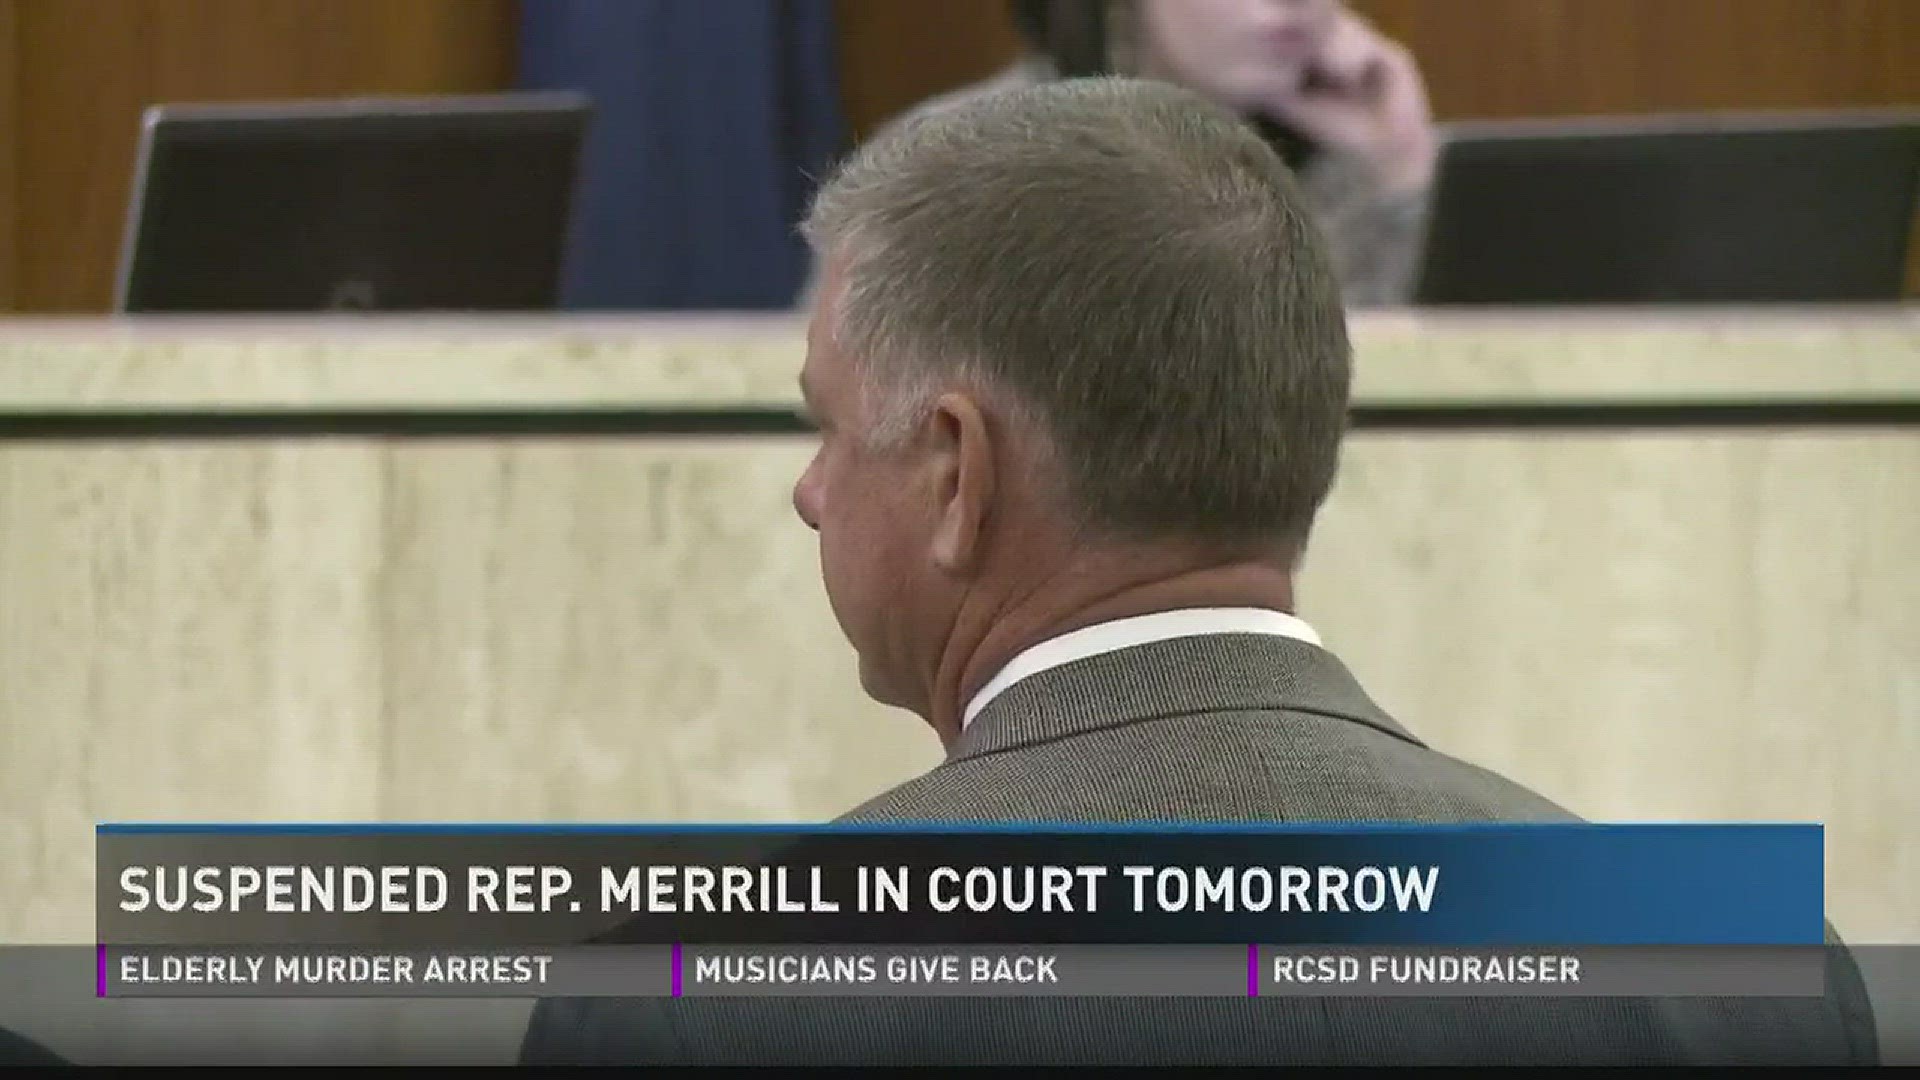 A hearing for suspended state house Representative James Merrill will be held on Friday